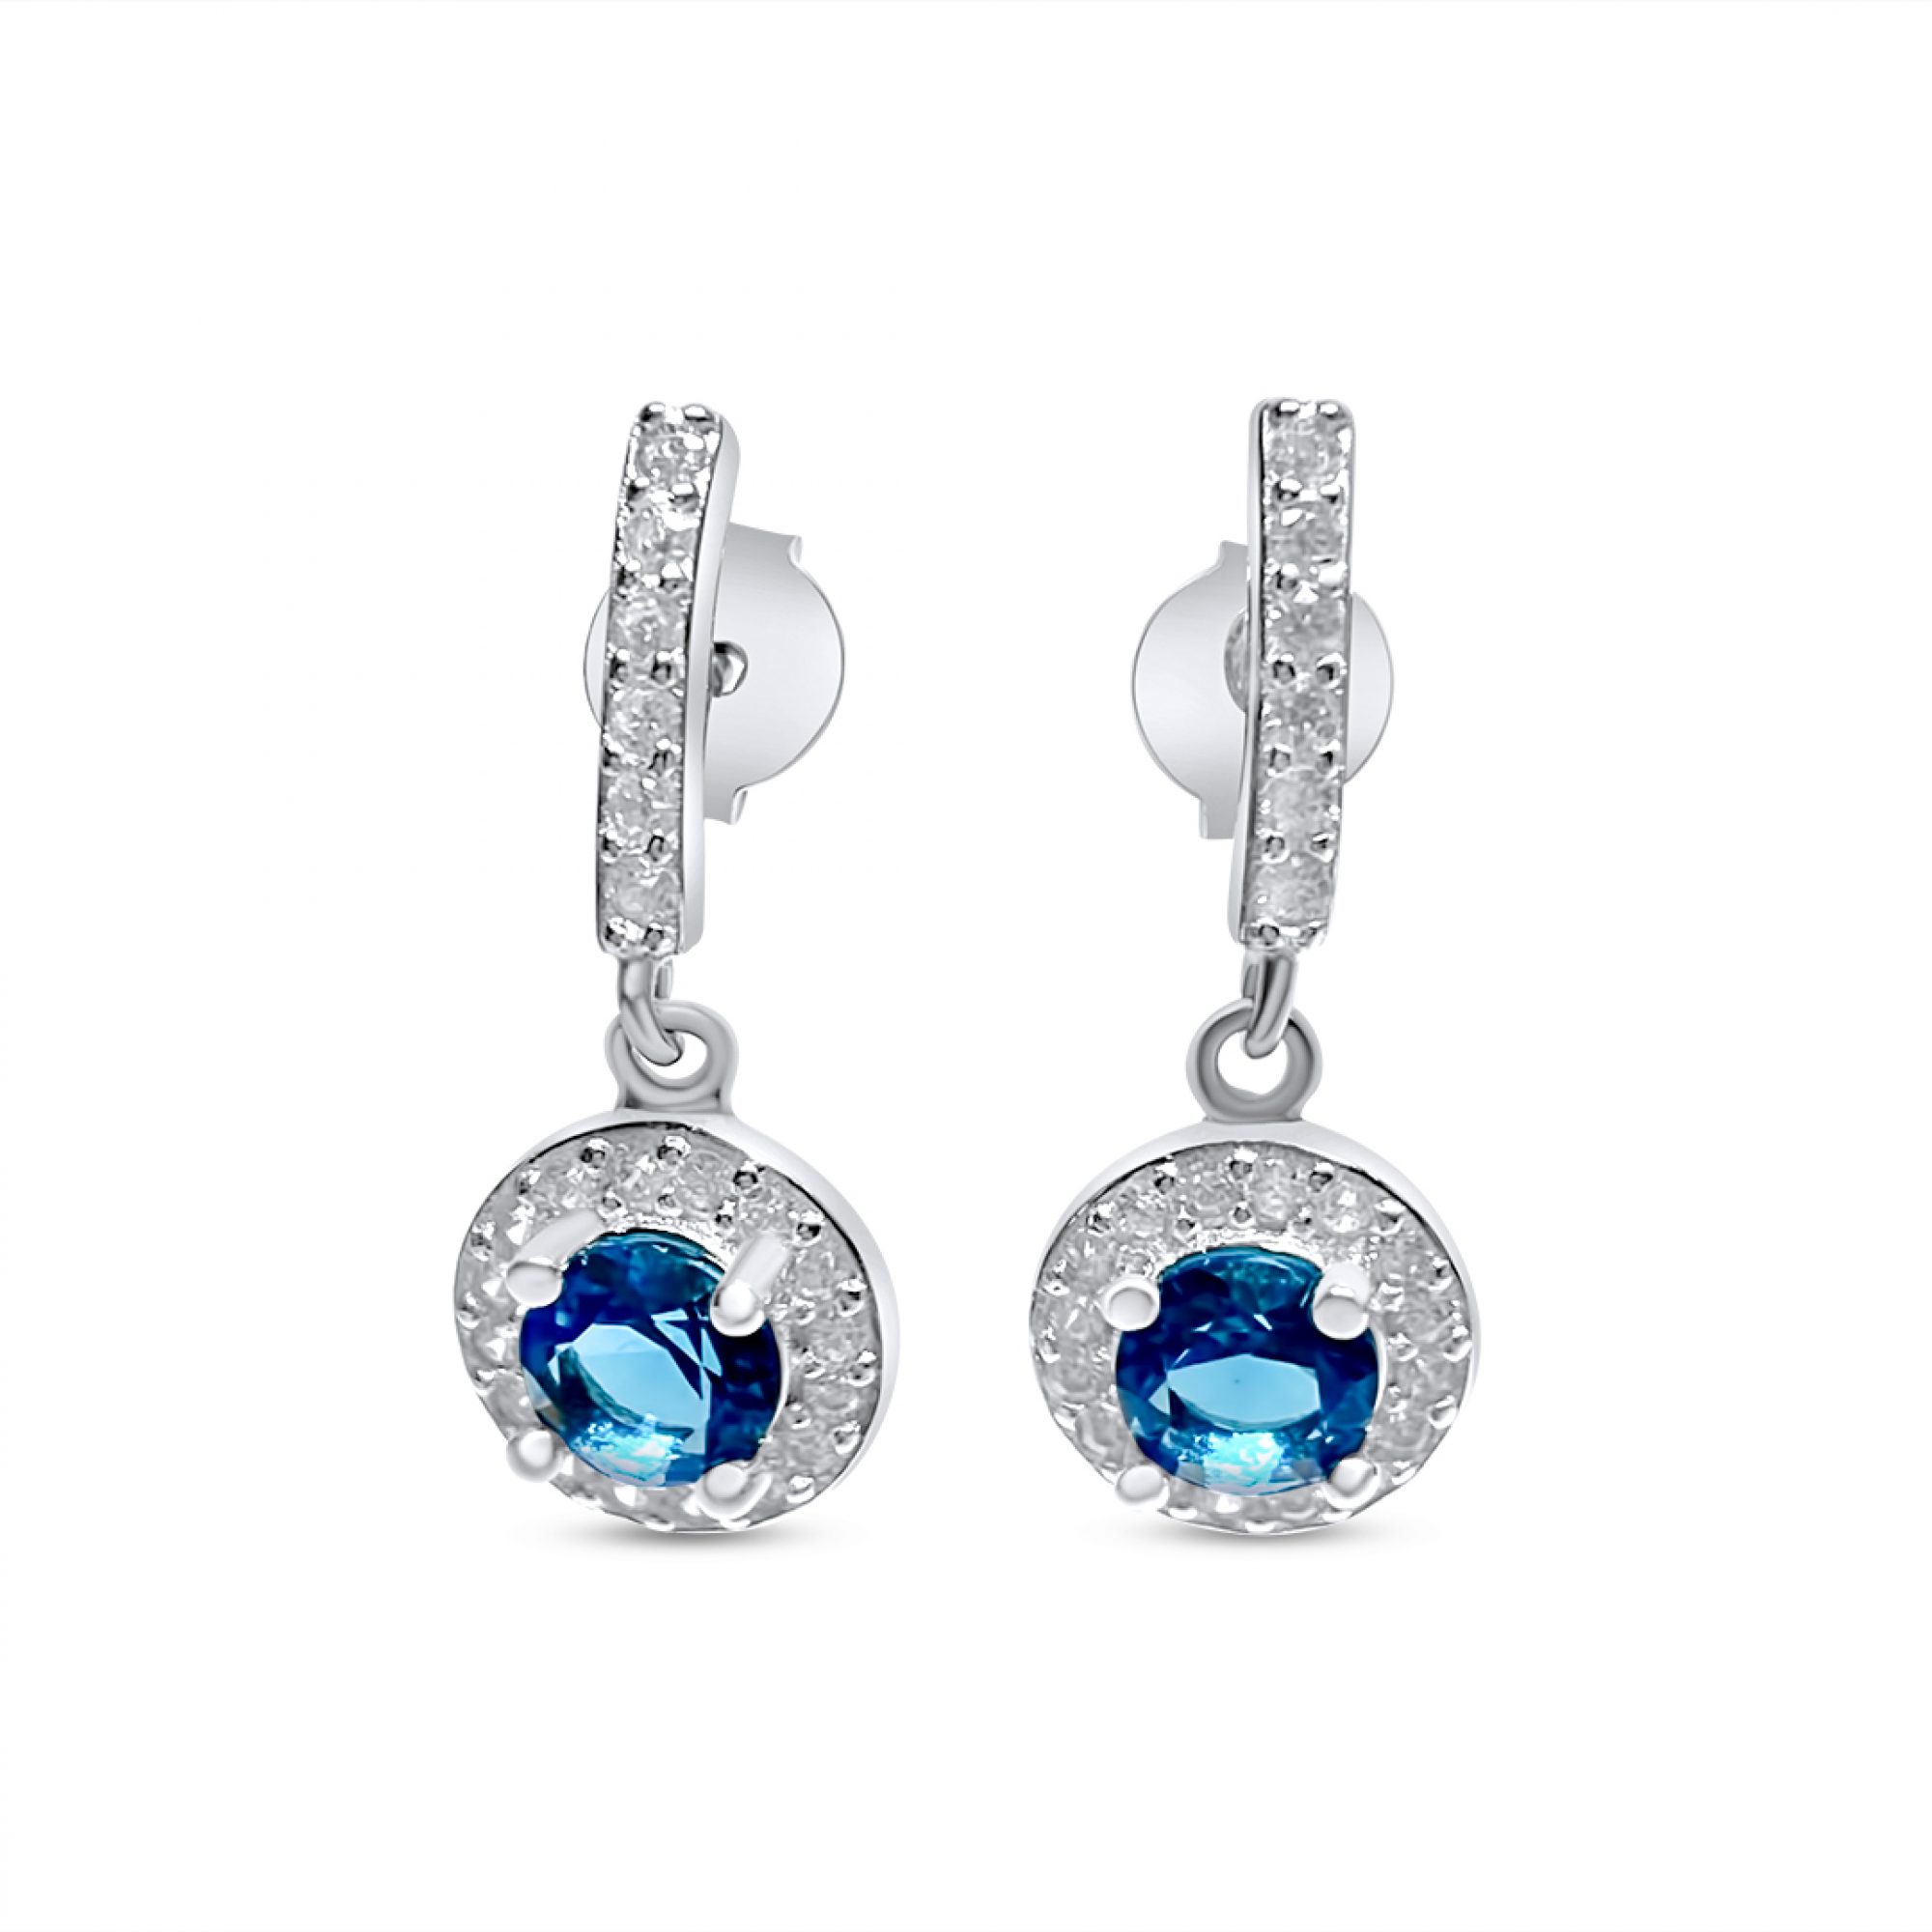 Silver earrings with zircon stones and aquamarine